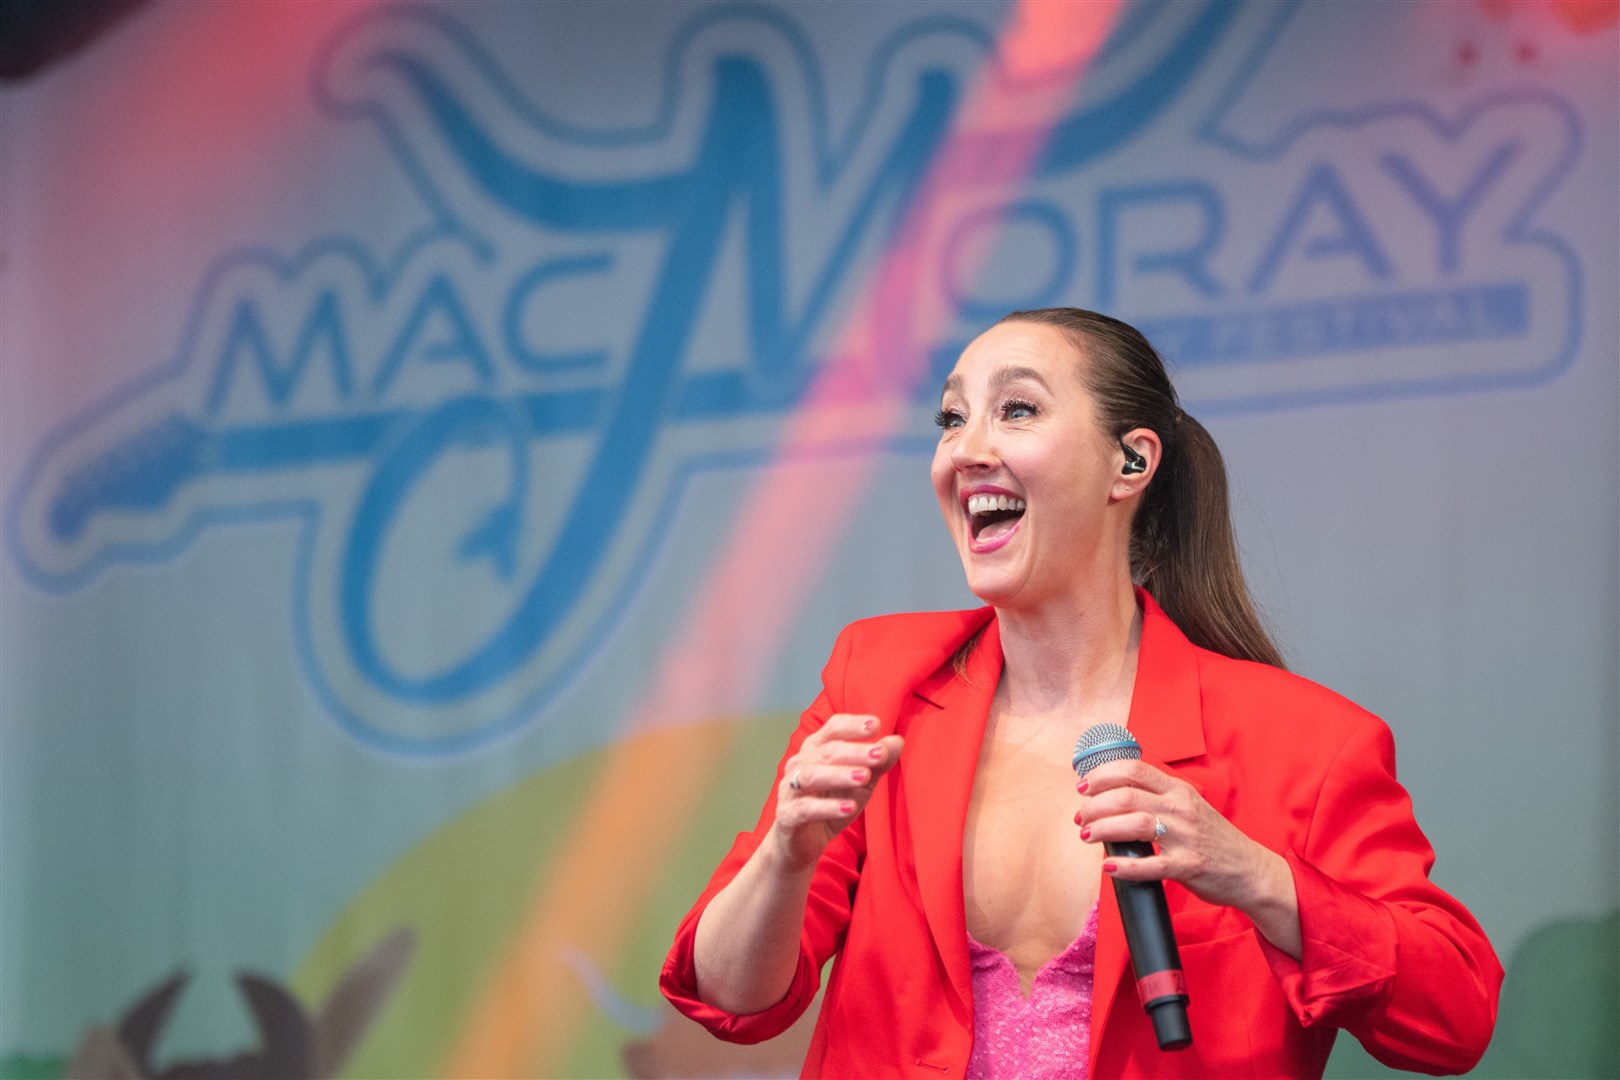 Judith Pronk, of Alice Deejay, performing just before Vengaboys. Picture: Daniel Forsyth